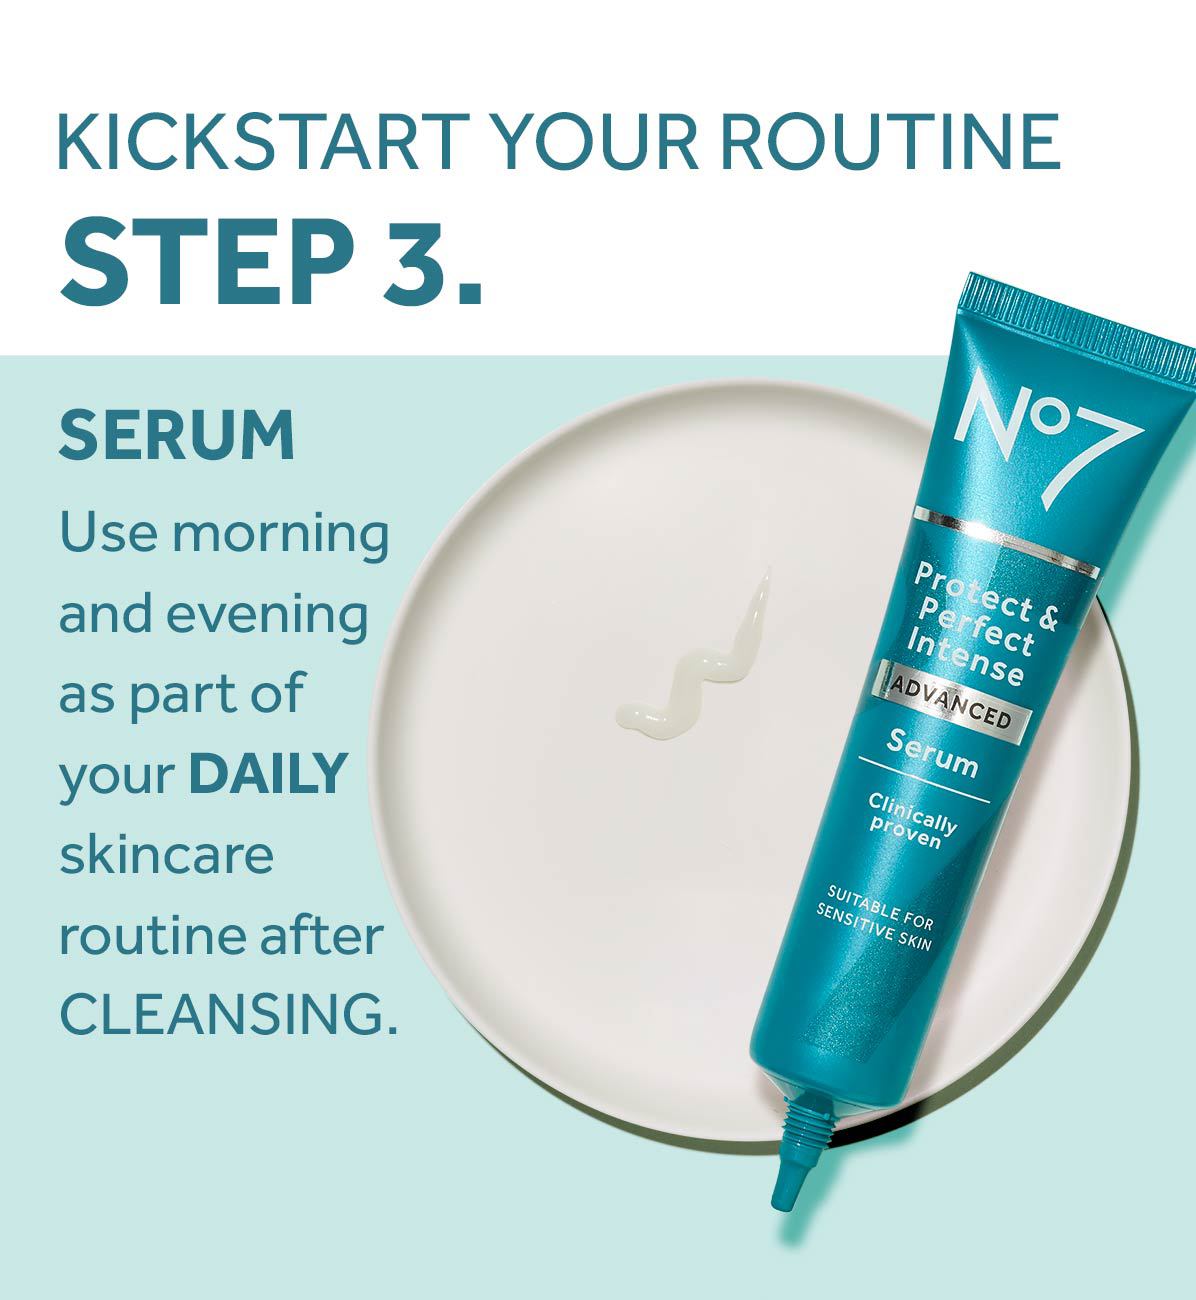 KICKSTART YOUR ROUTINESTEP 3.SERUMUse morning and evening as part of your DAILY skincare routine after CLEANSING.